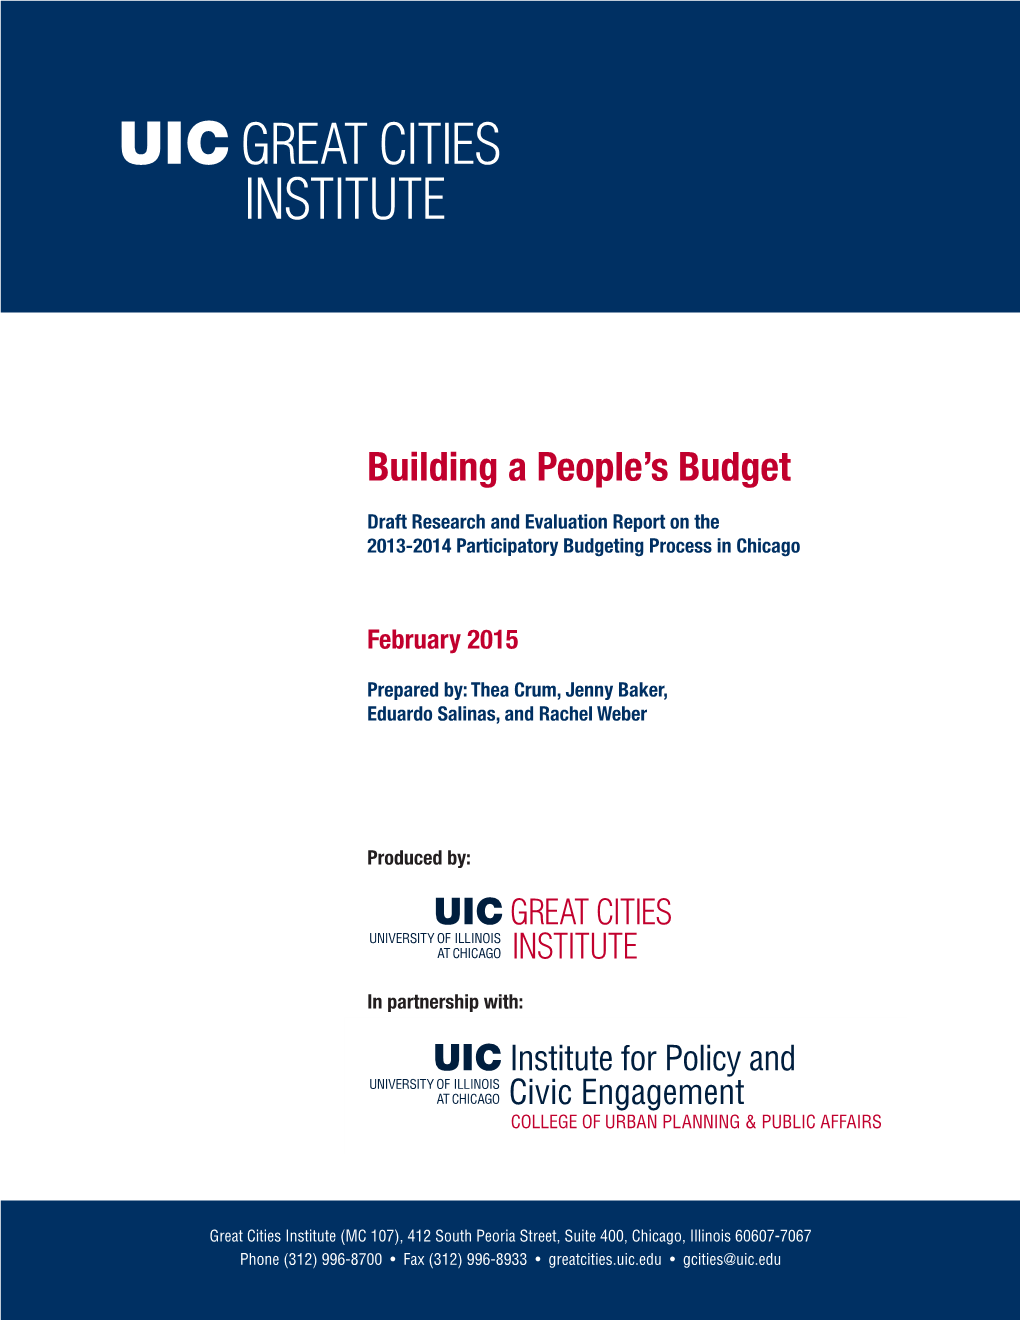 Building a People's Budget